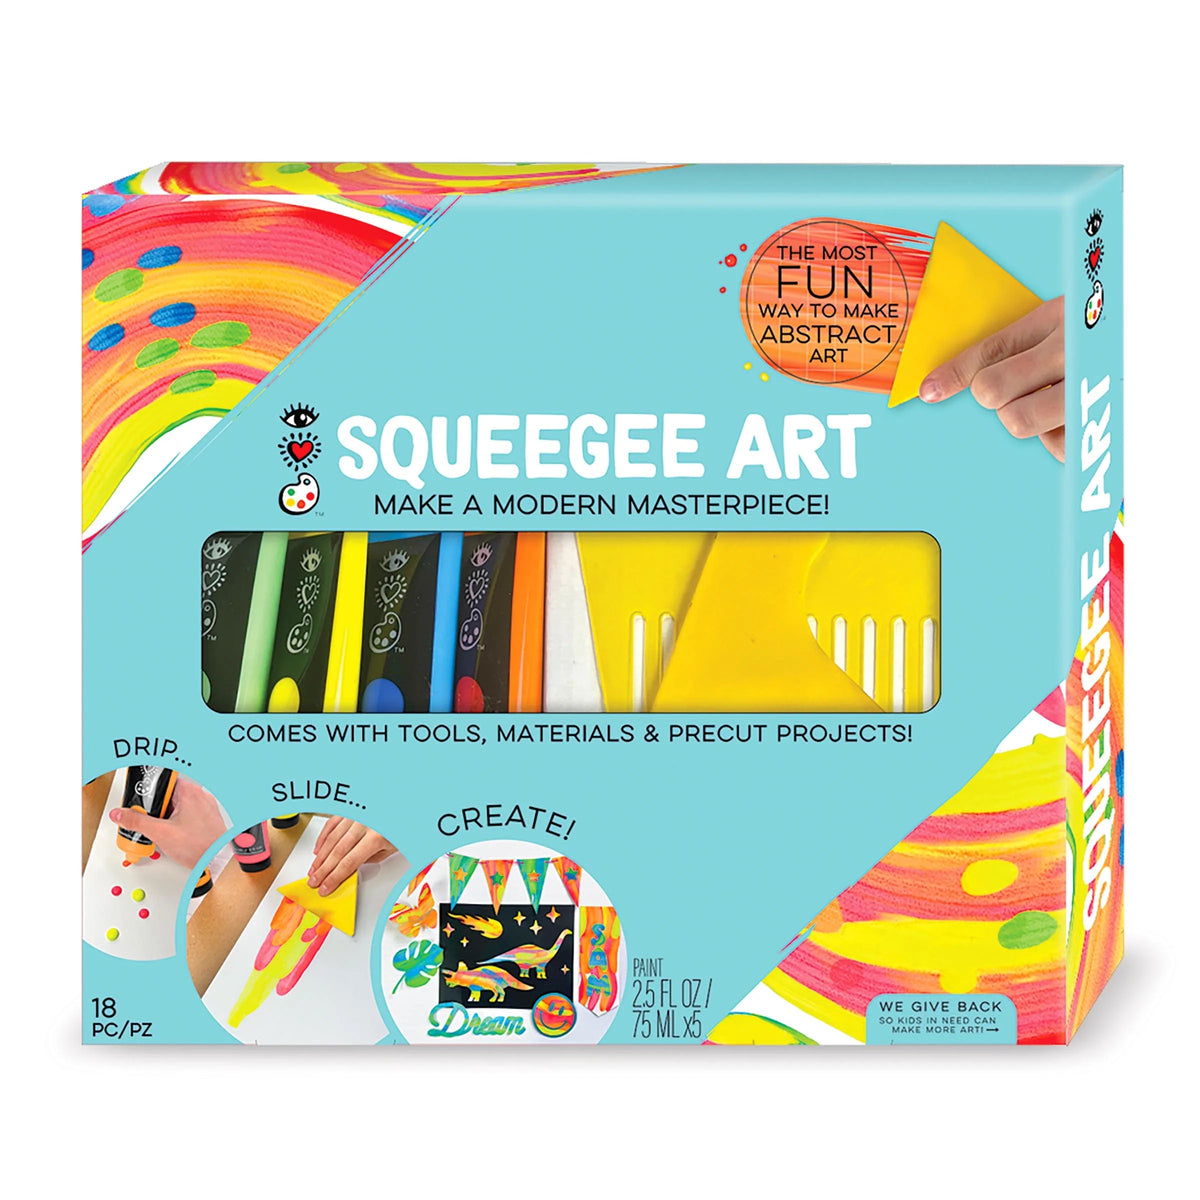 75 PIECE SKETCHING AND DRAWING SET